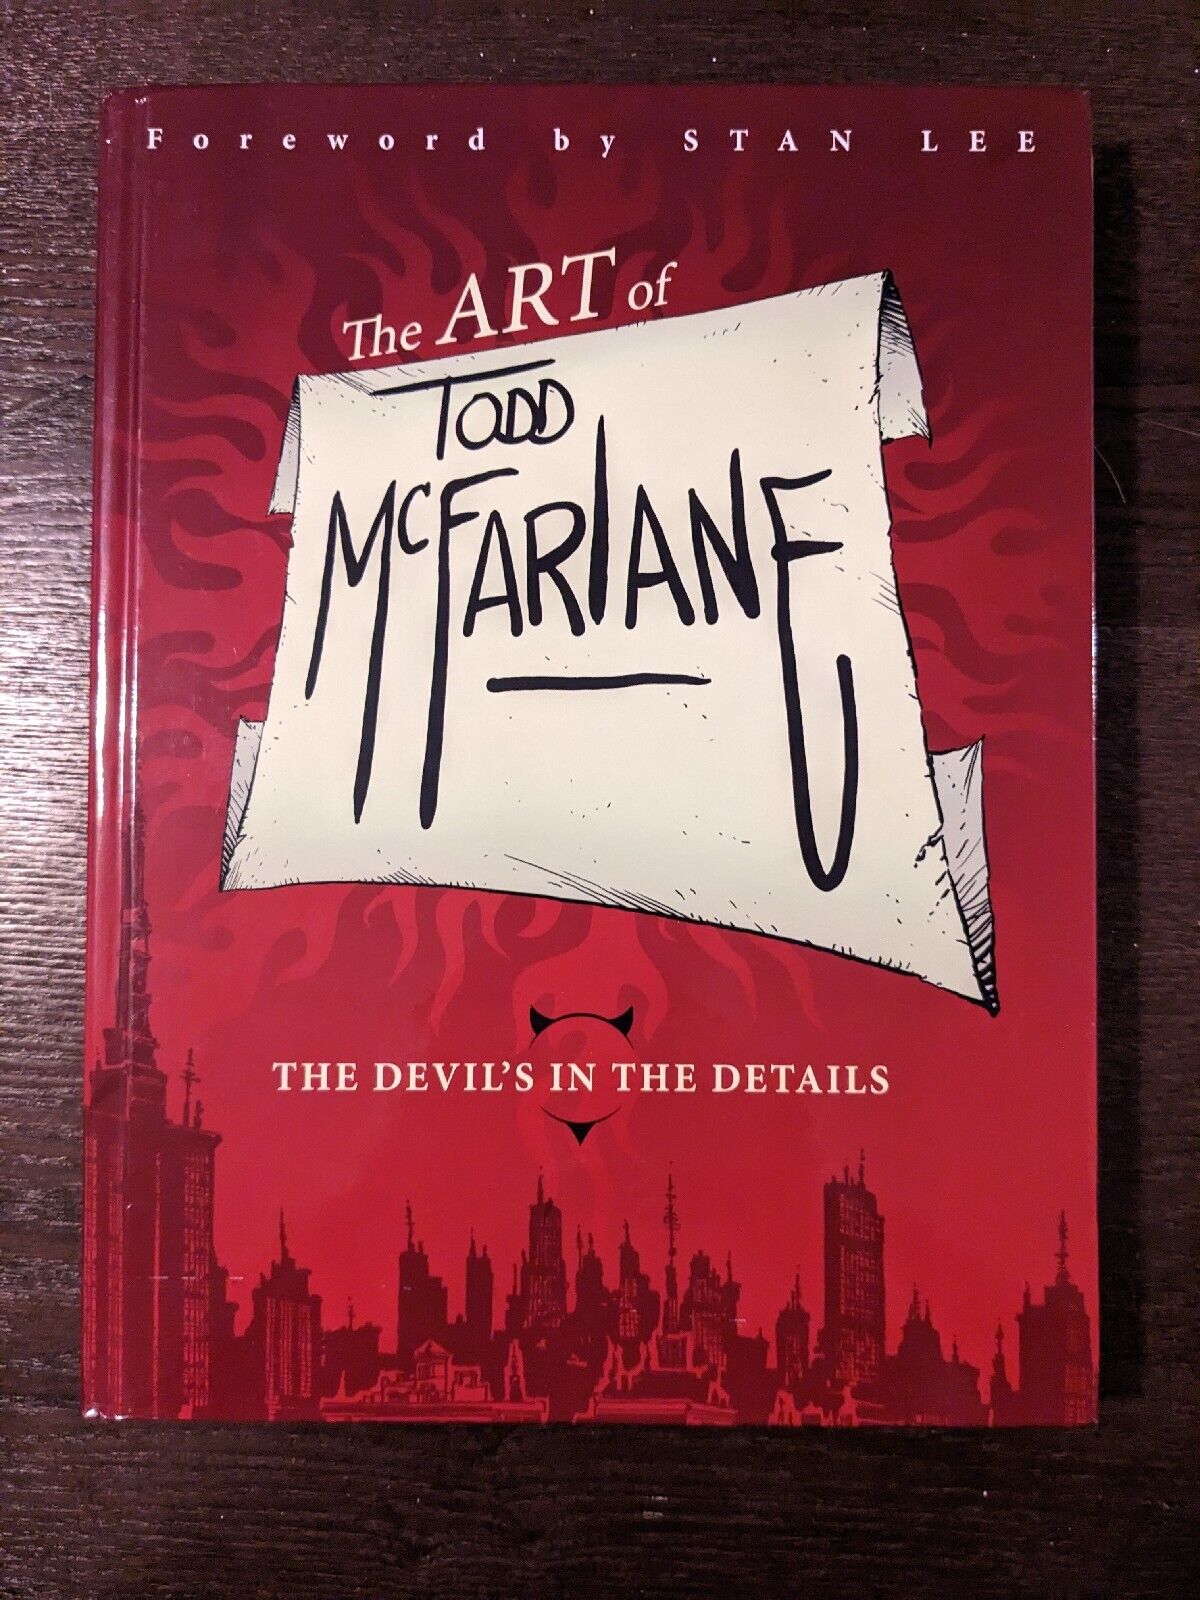 The Art of Todd McFarlane 2012 The Devil’s In The Details Image Hardcover